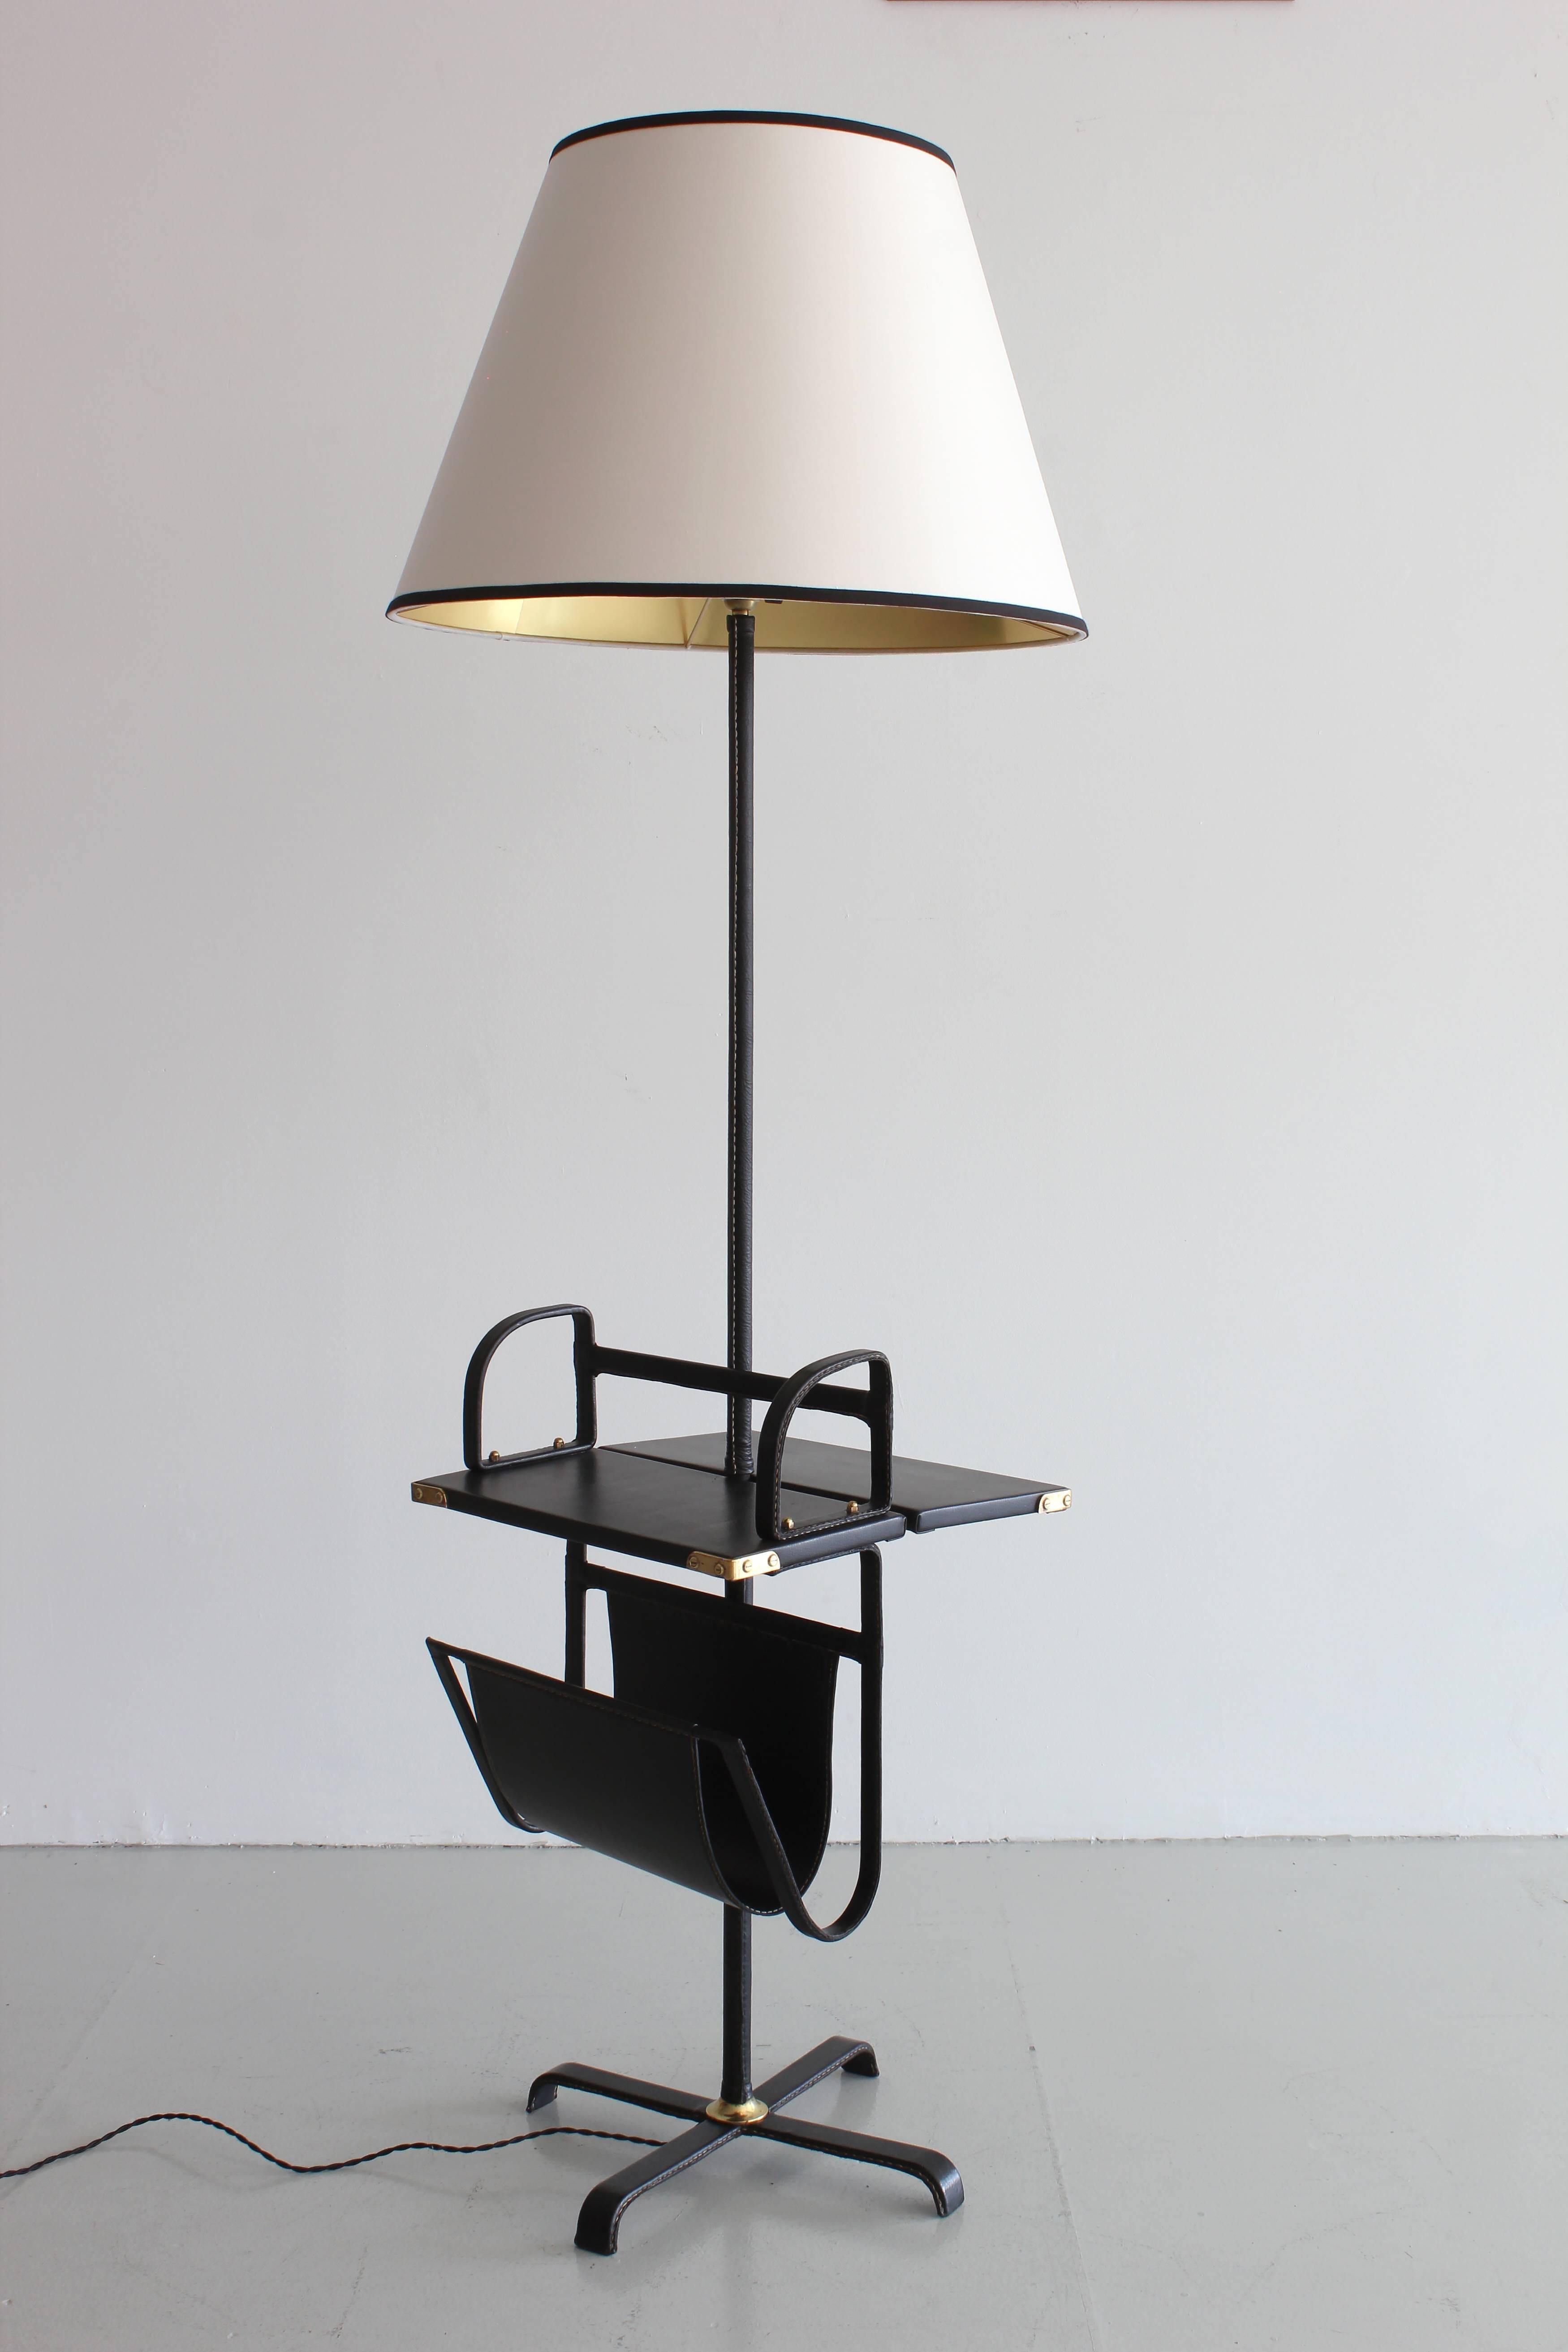 Exquisite floor lamp by Jacques Adnet with table and floating magazine holder, brass detailing and black leather.
  